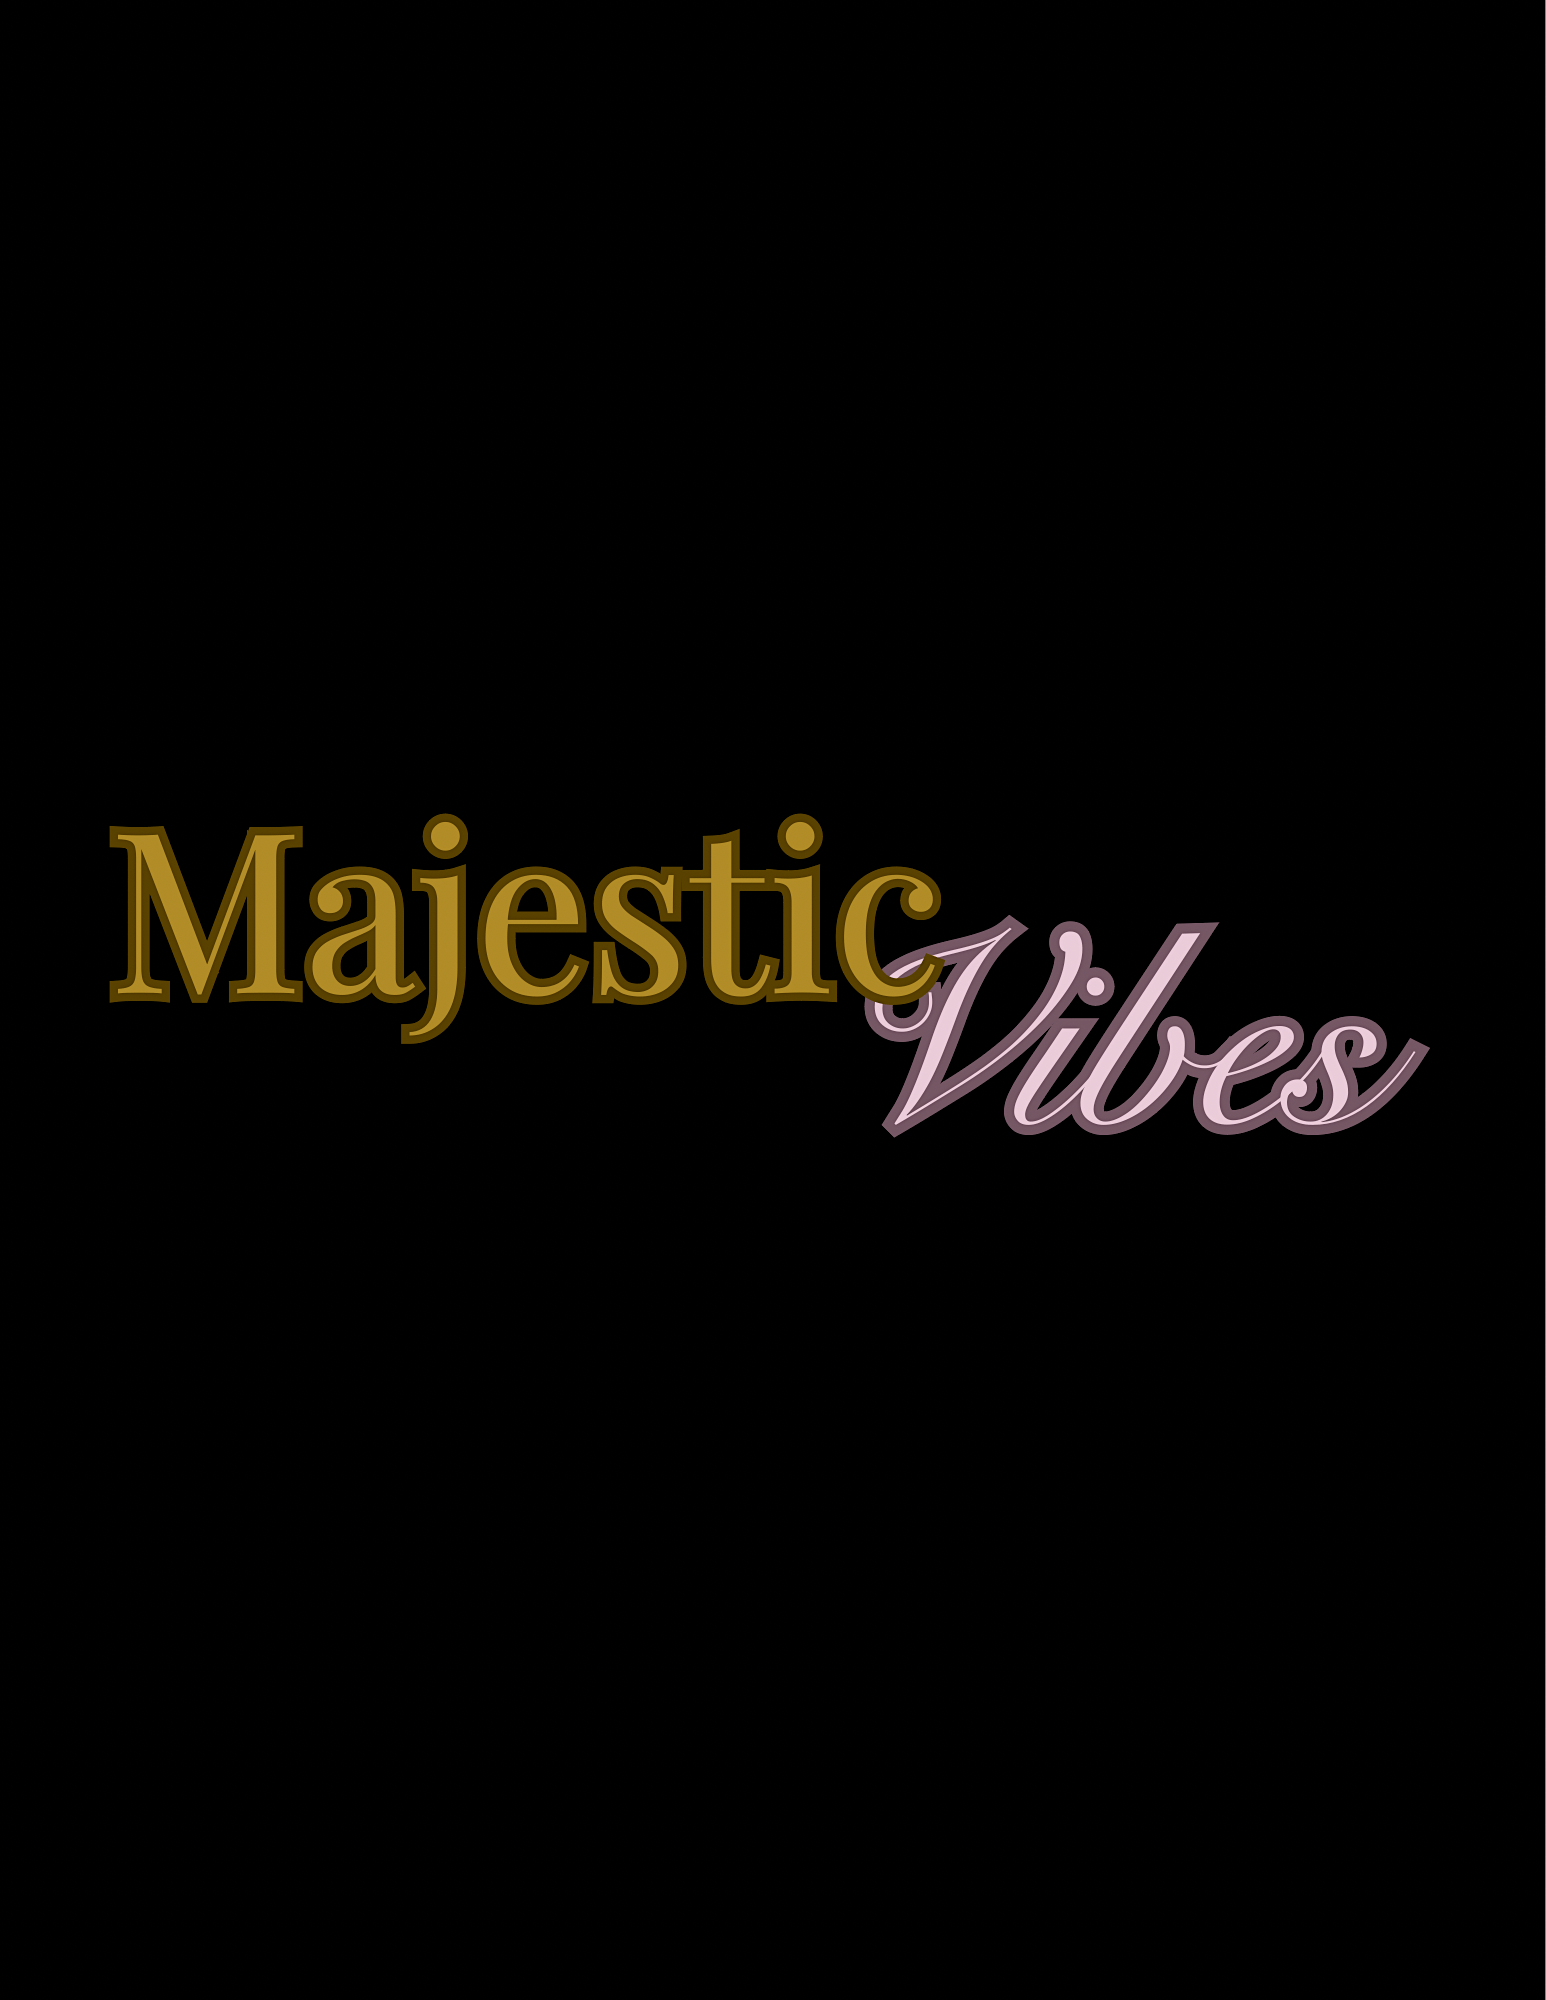 Majestic Vibes: Step Into Your Power